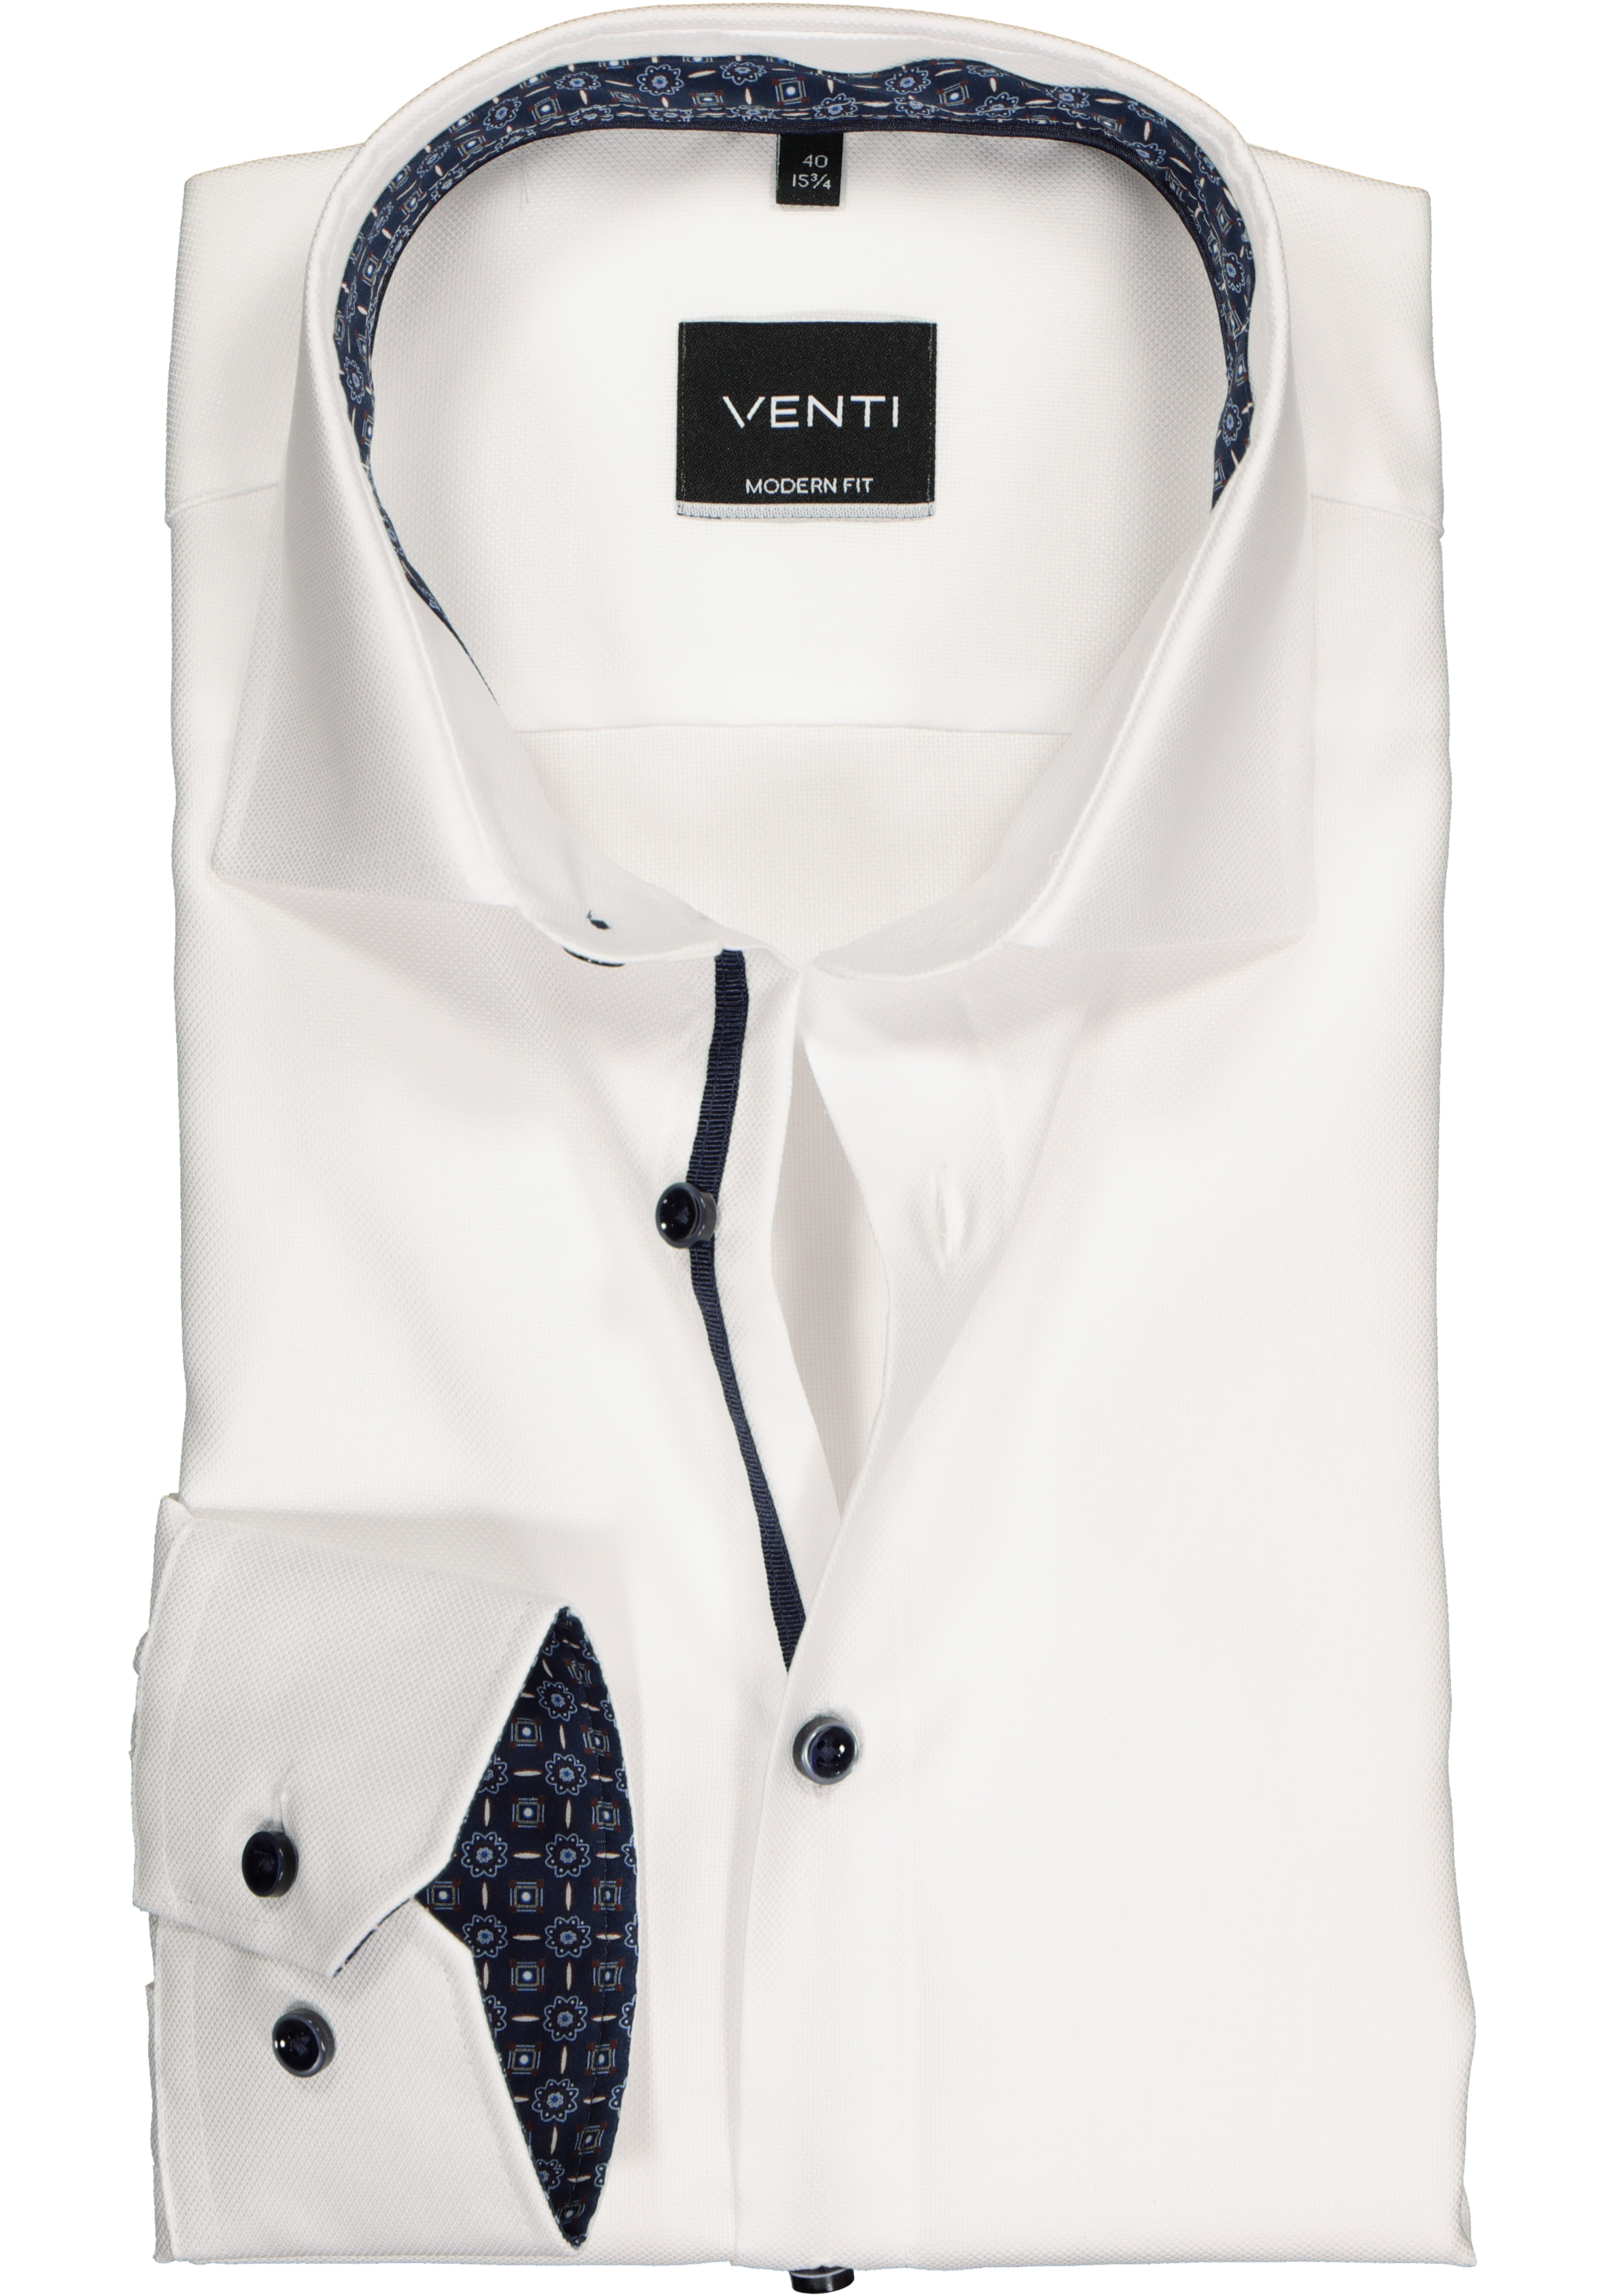 VENTI fit overhemd, wit structuur (contrast) - Zomer tot 50% korting